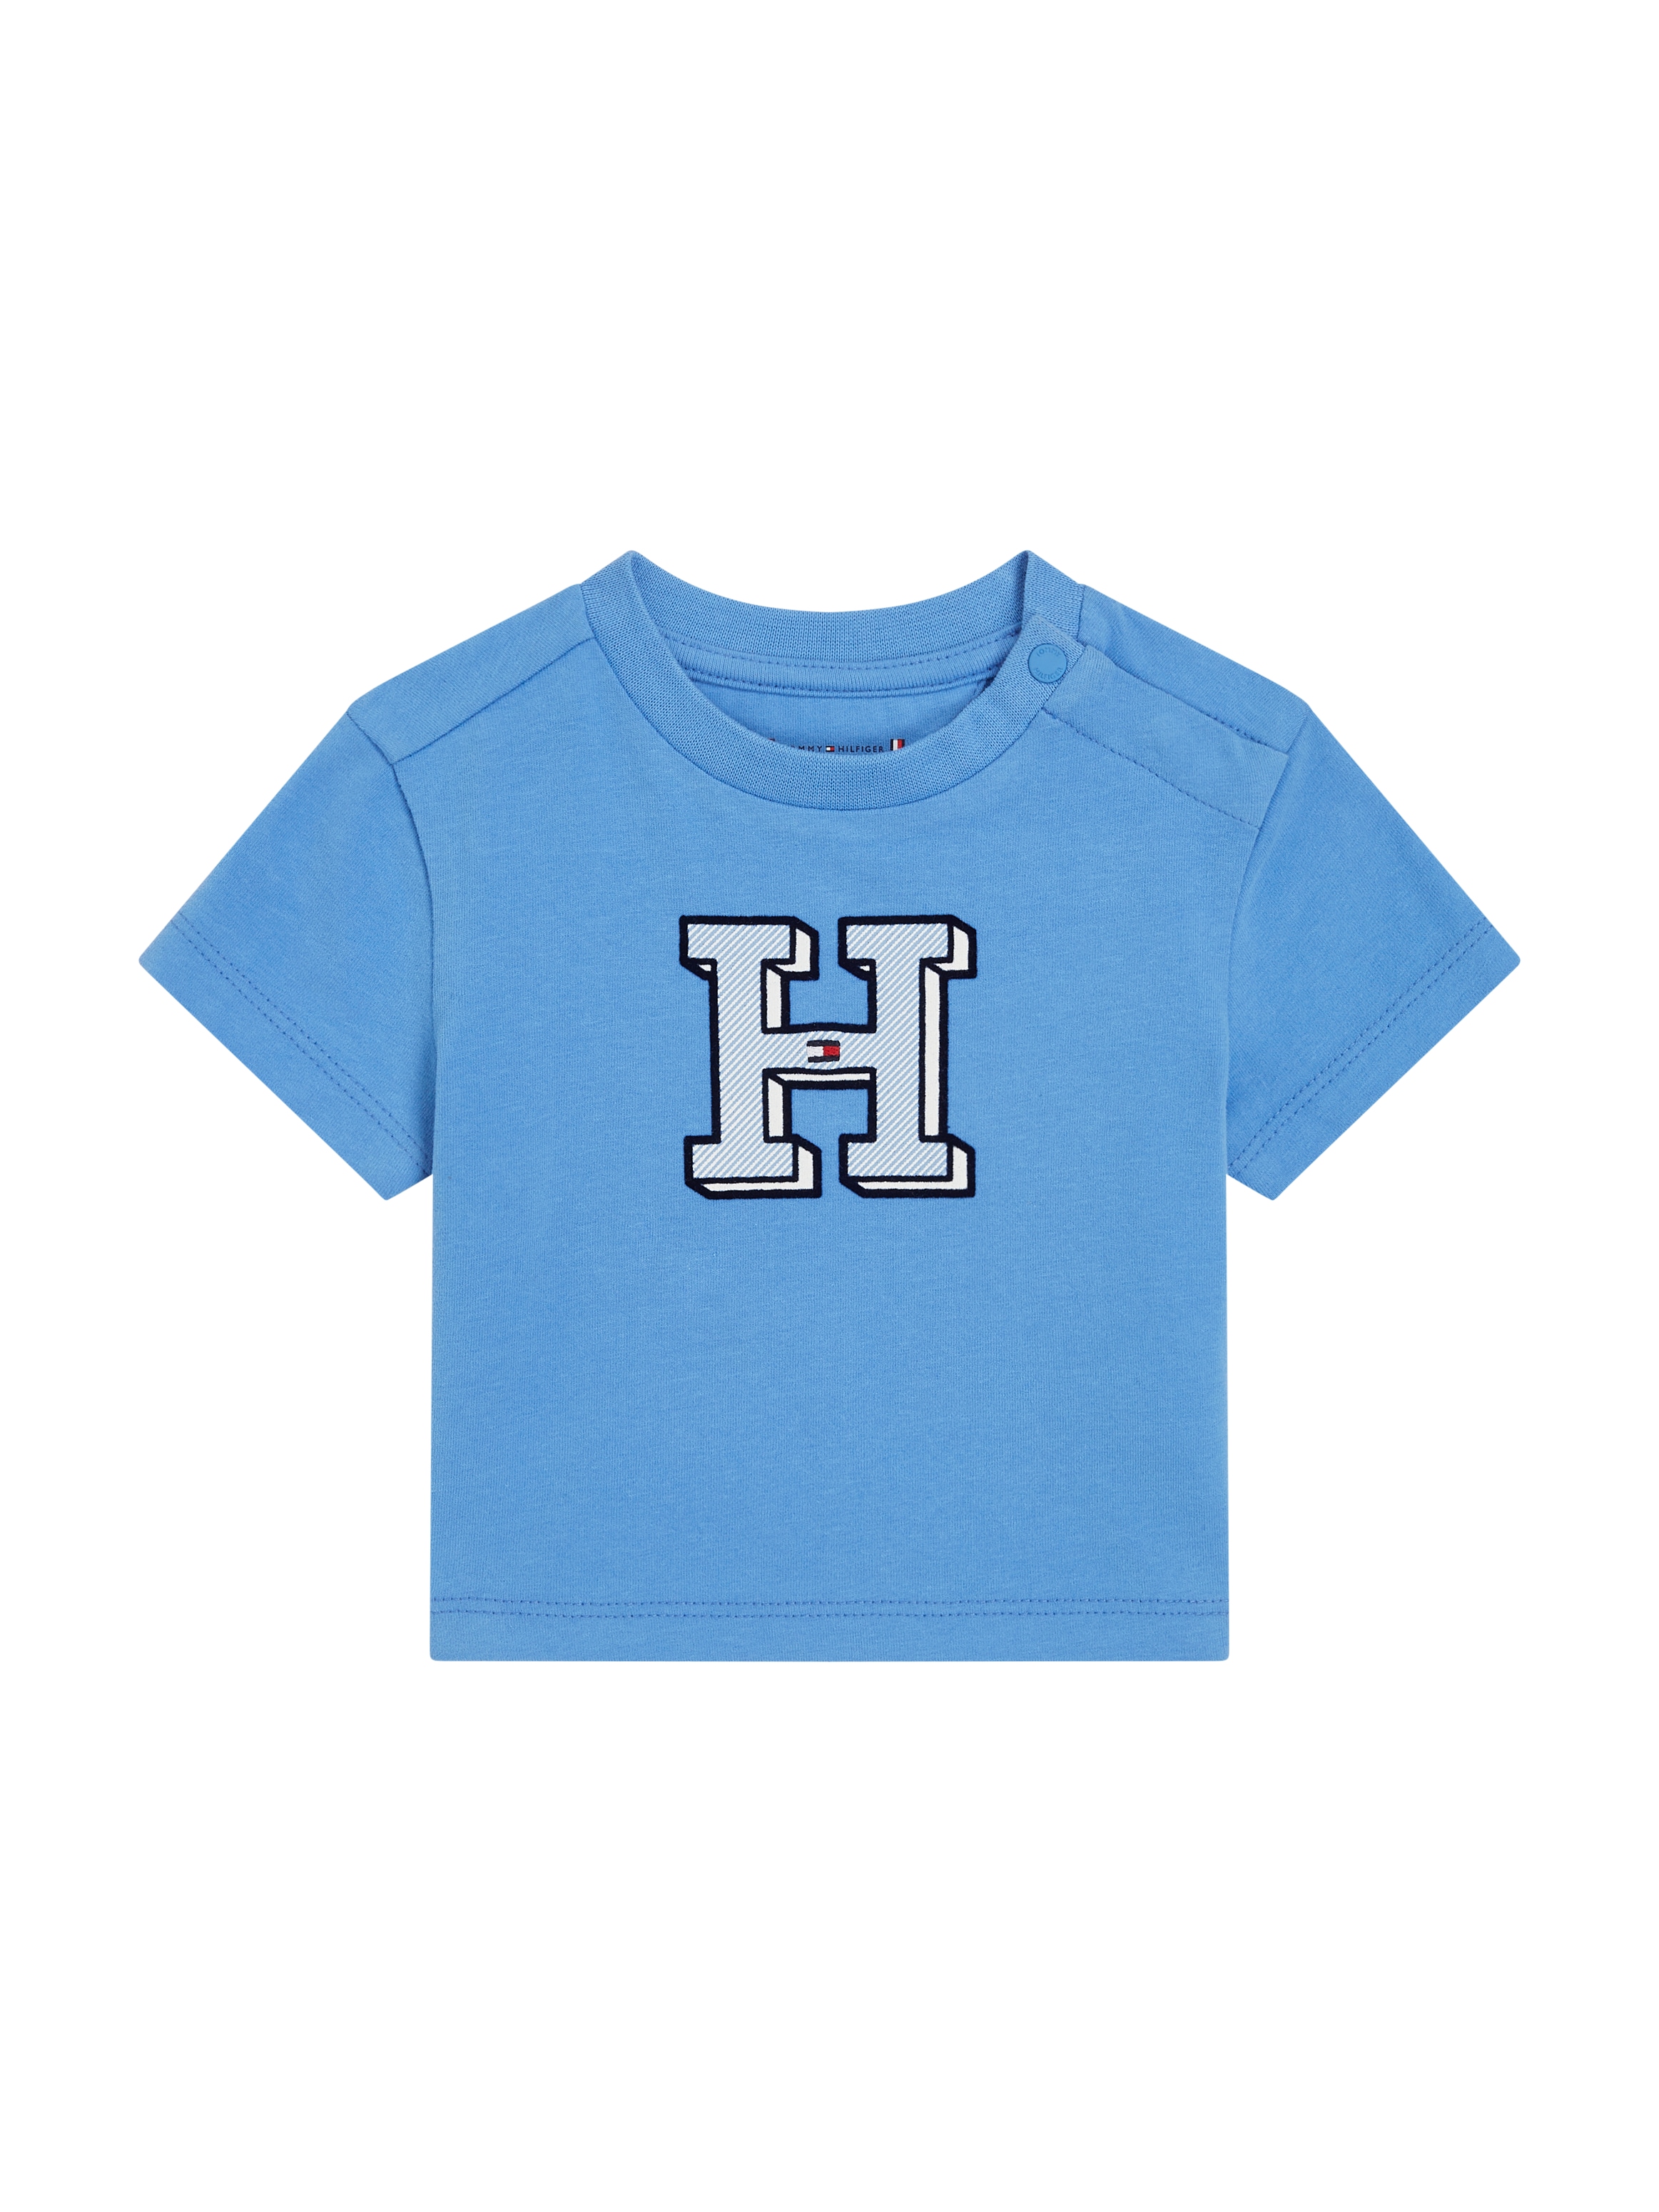 TOMMY HILFIGER Marškinėliai »BABY ITHACA H TEE S/S« s...